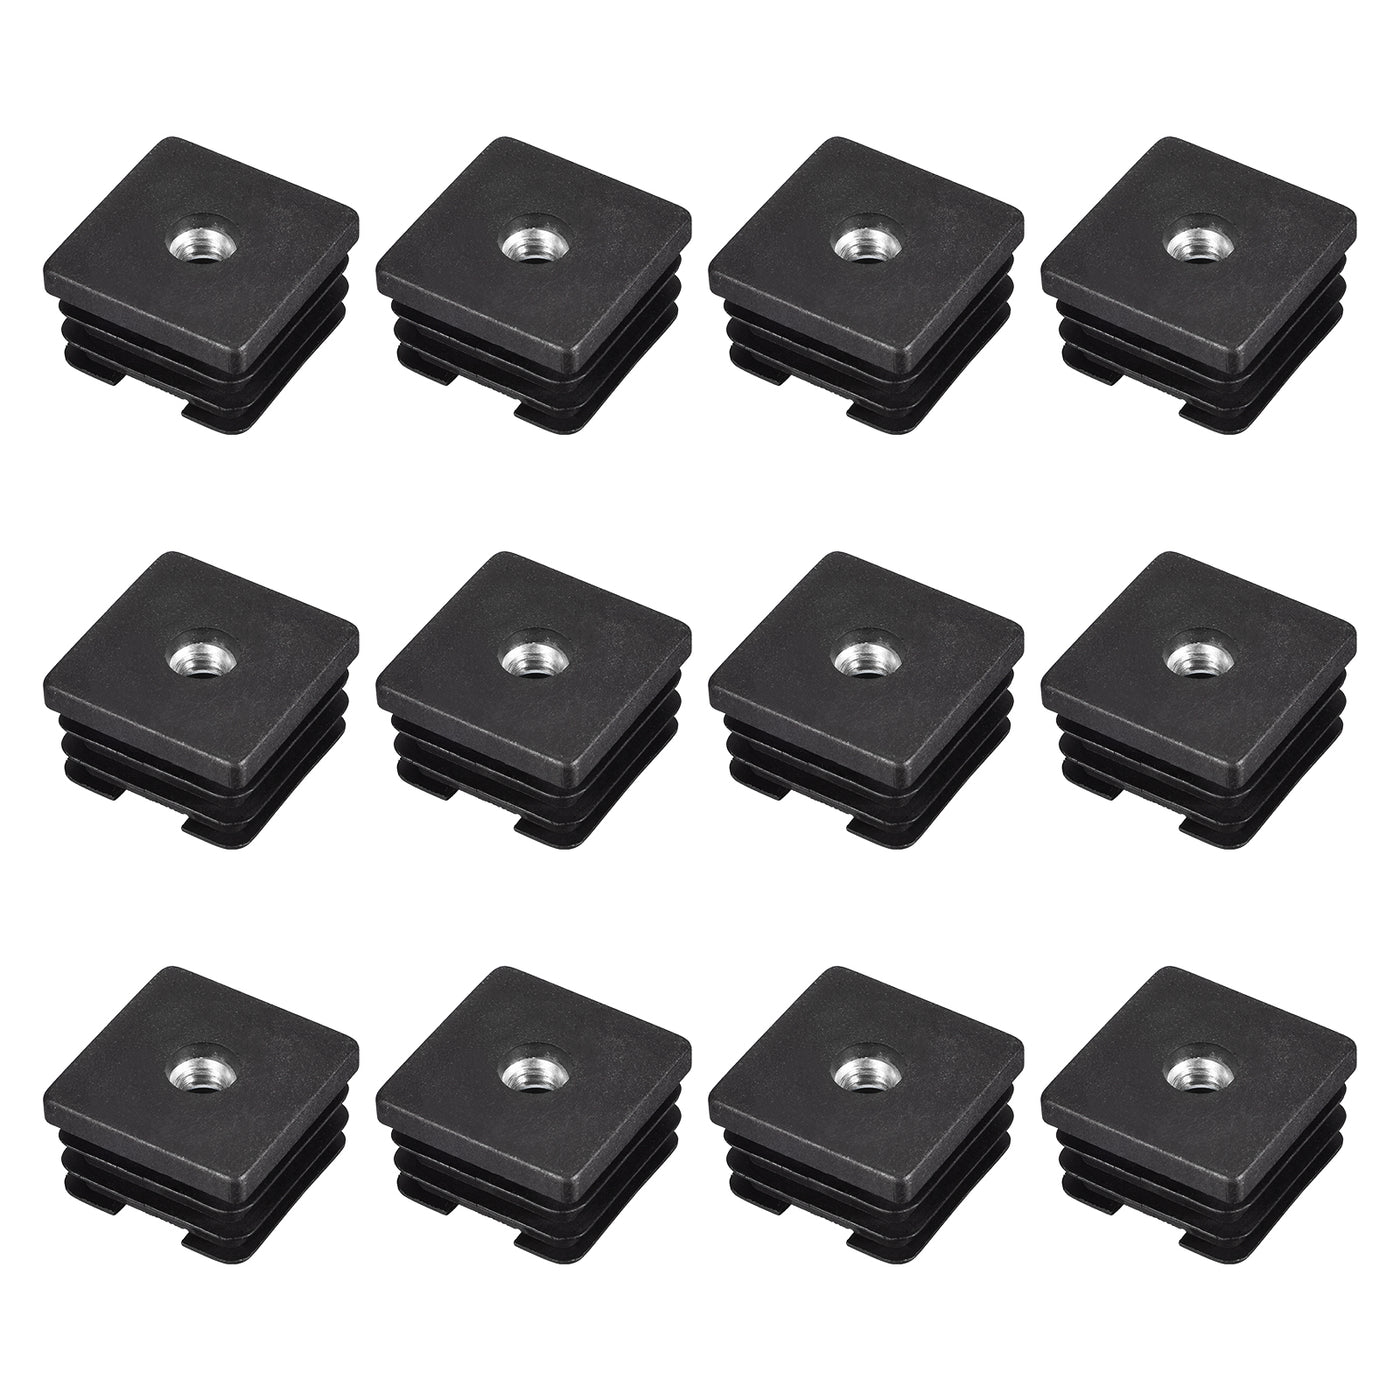 uxcell Uxcell 12Pcs 1.38"x1.38" Caster Insert with Thread, Square M8 Thread for Furniture